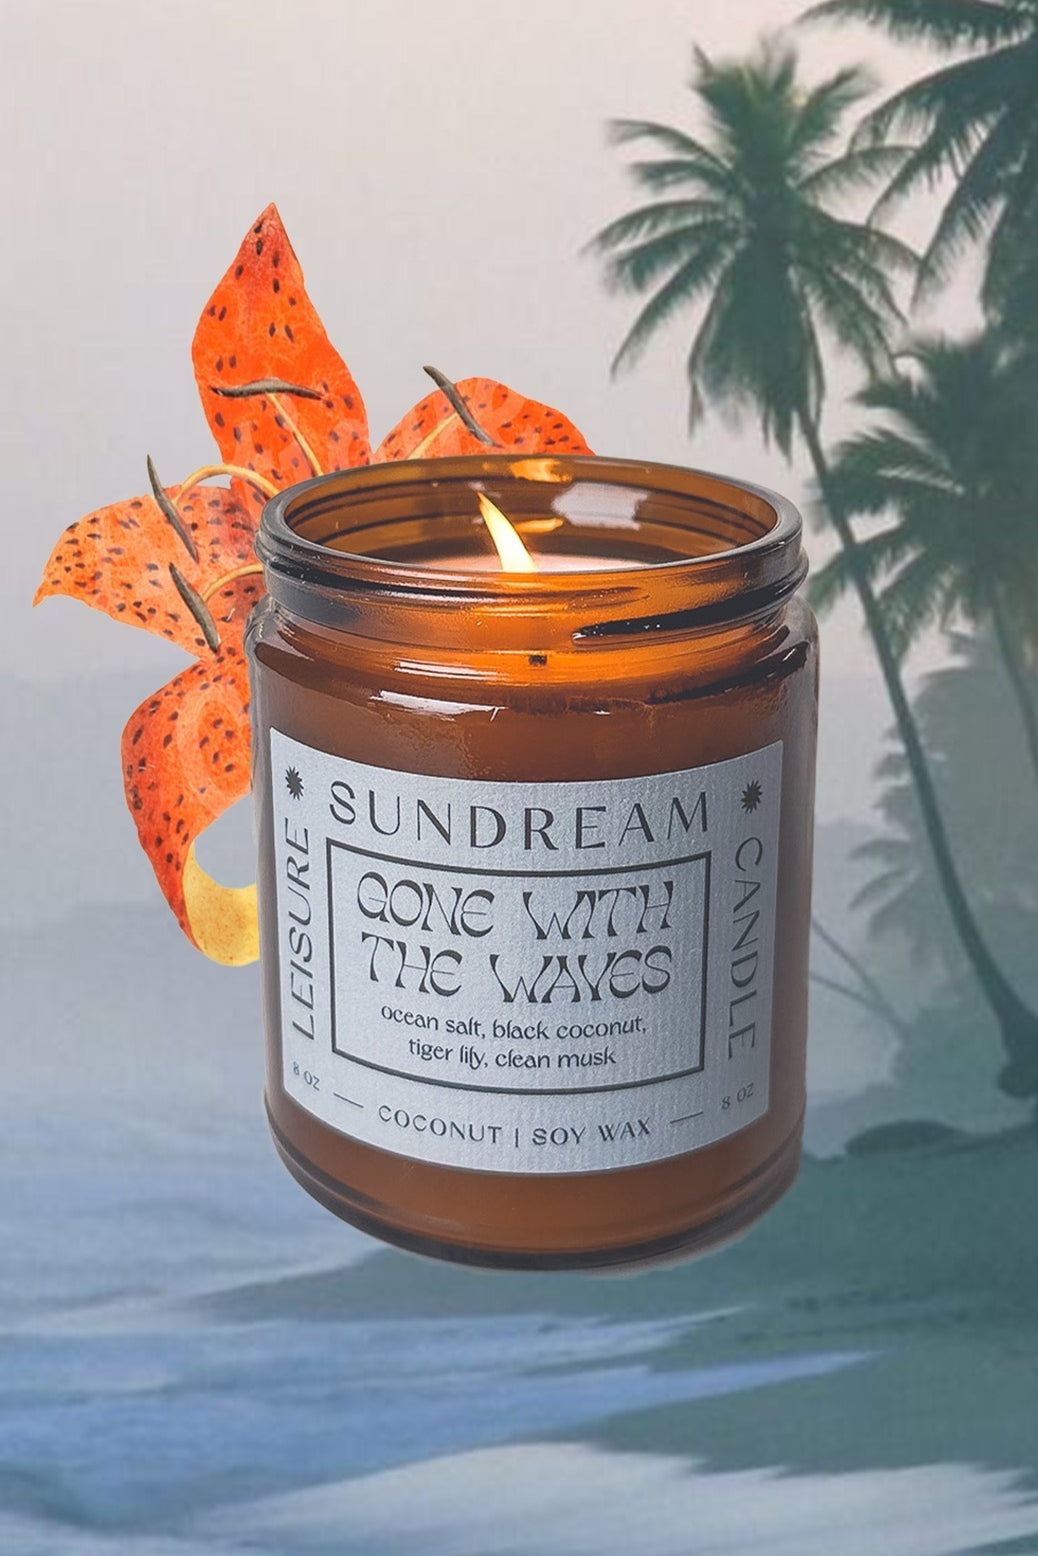 Hand poured Gone with the Waves candle by Sundream. With notes of ocean salt, black coconut, tiger lily, clean musk this balanced blend was created to inspire moments of relaxation & inspiration.